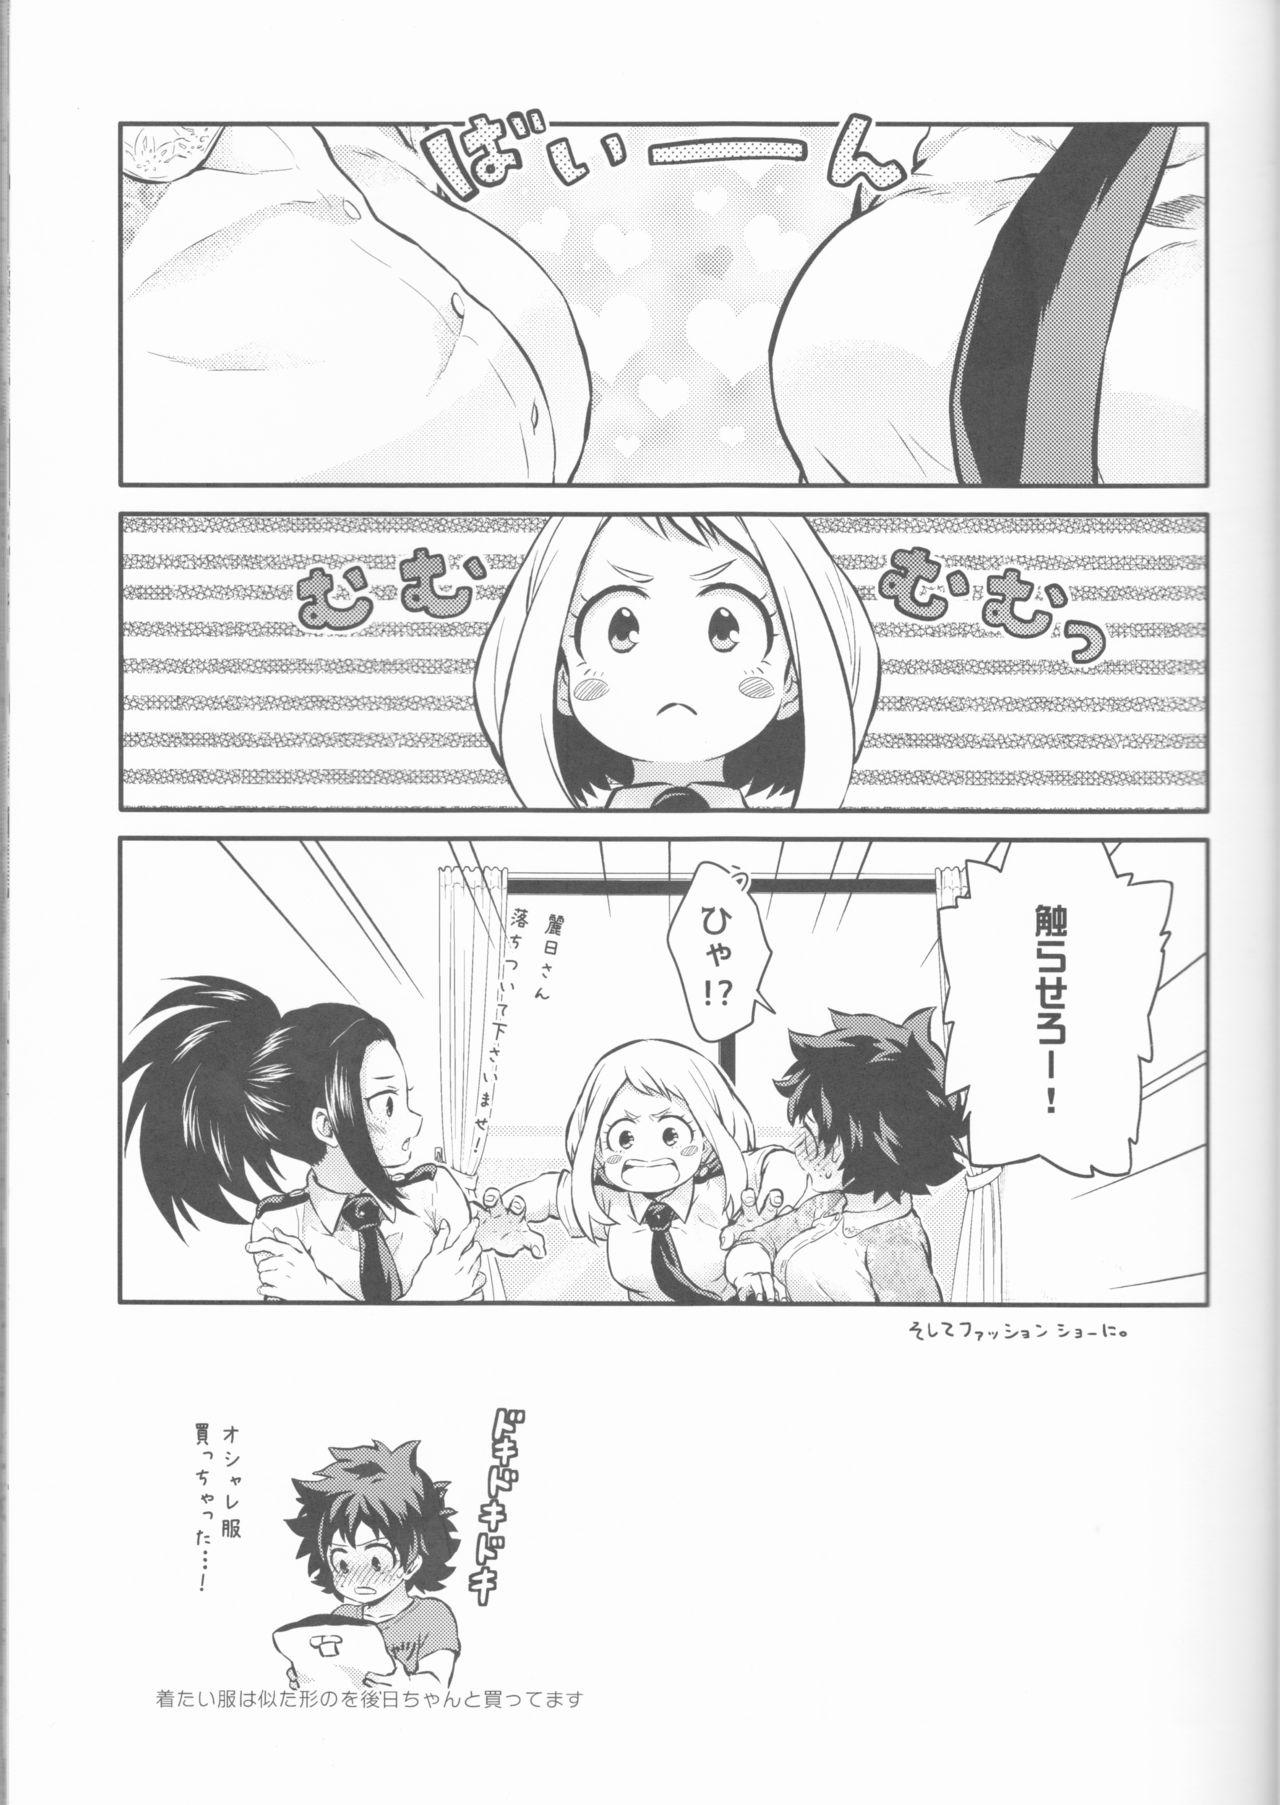 Linda Love Me Tender another story - My hero academia Anal Licking - Page 7